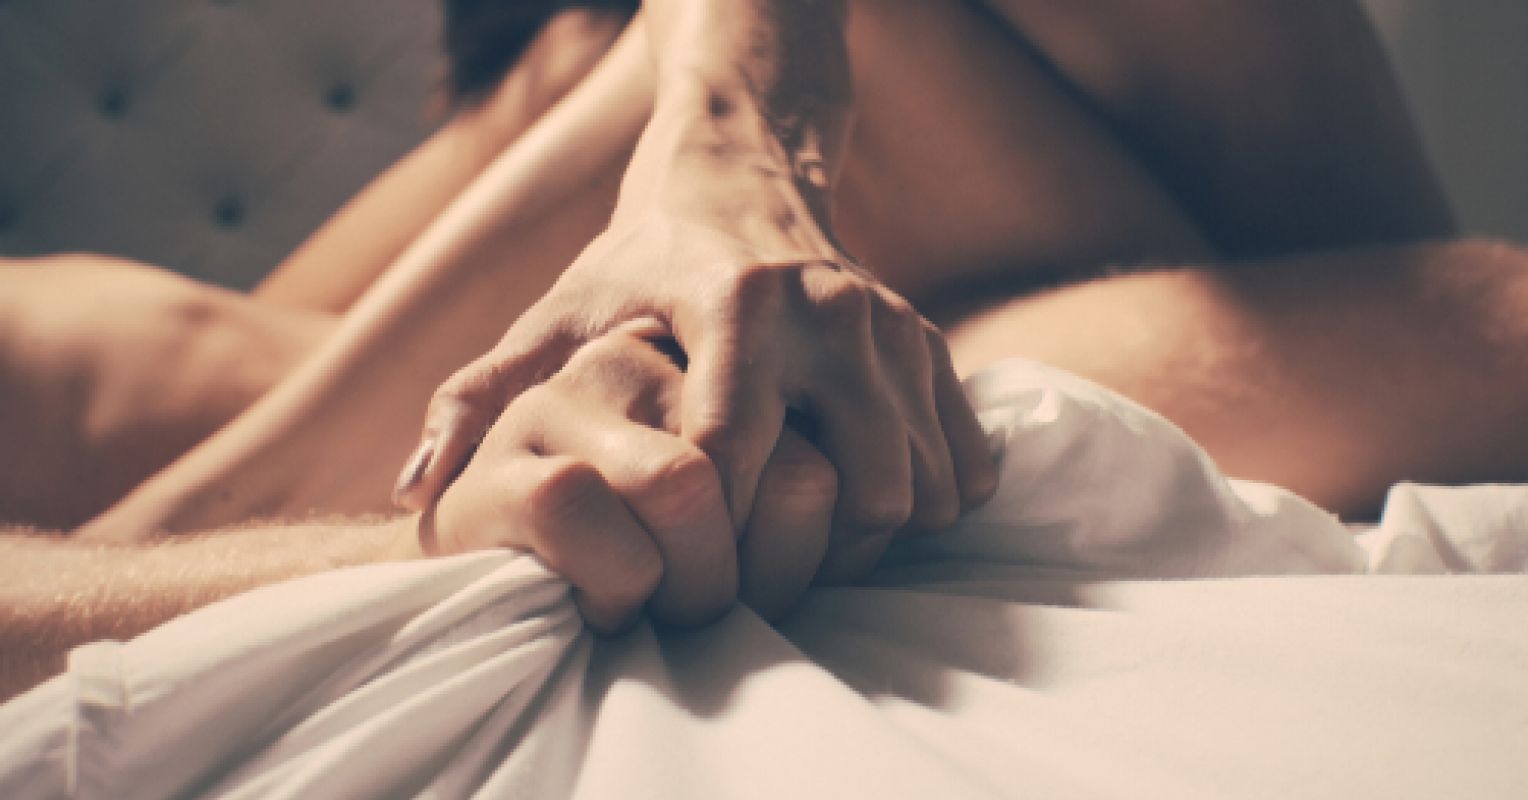 There May Be a Better Way to Initiate Sex with Your Partner Psychology Today pic